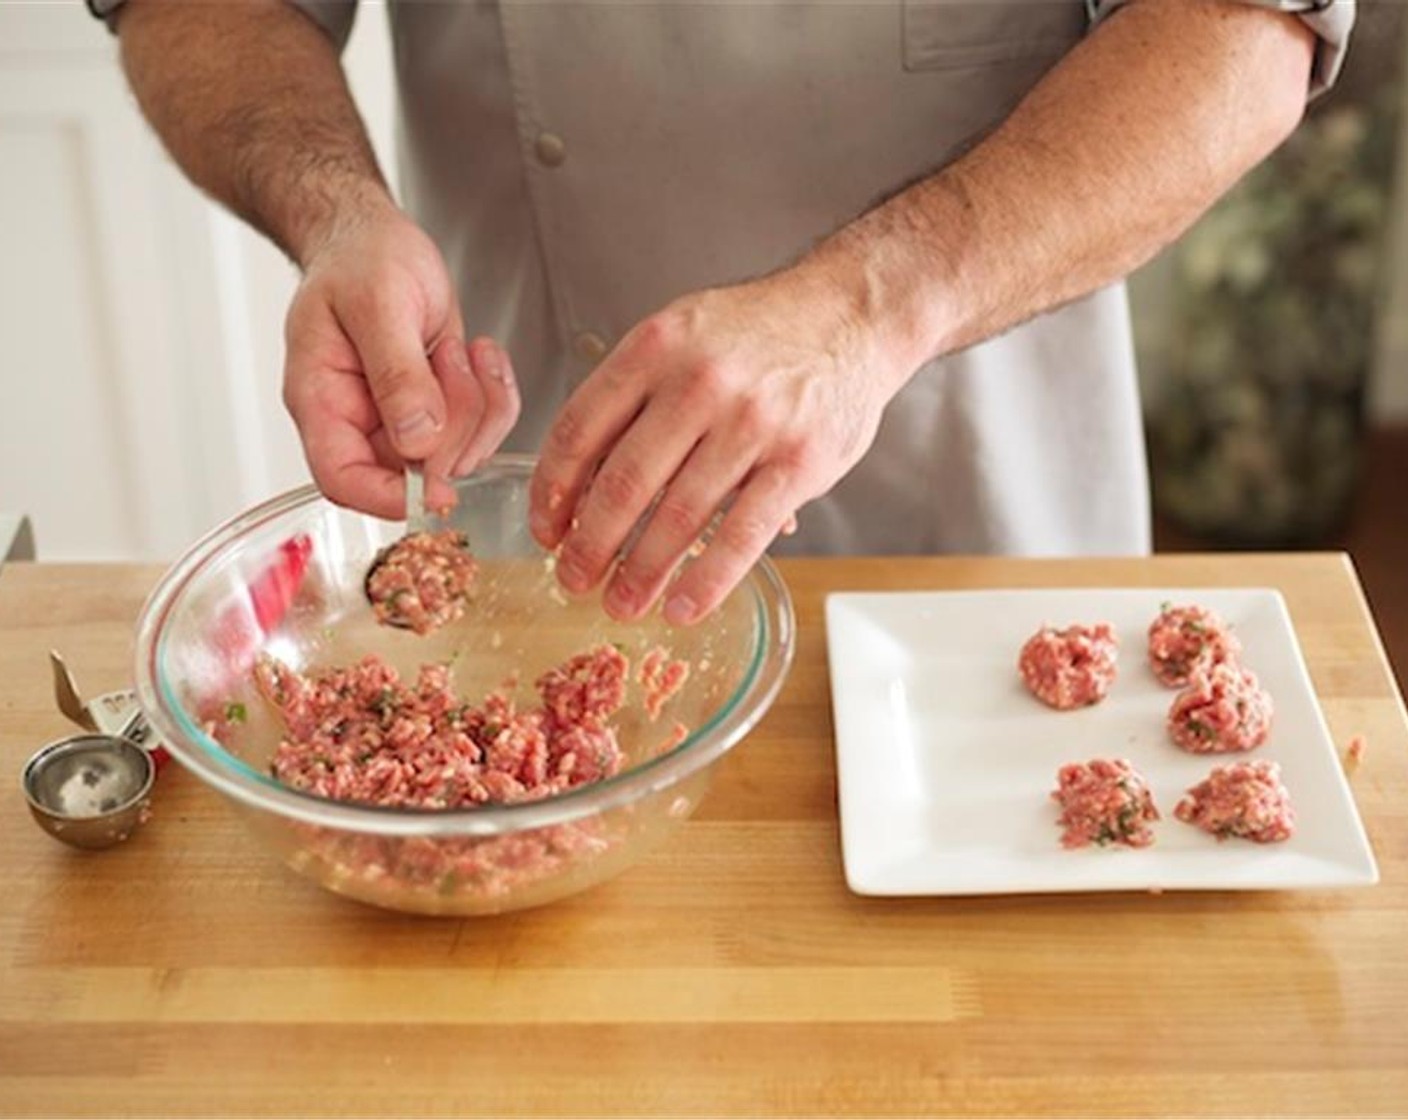 step 6 Using a one tablespoon measuring spoon, scoop lamb mixture into a ball and place meatballs onto a plate. Continue rolling. Place rolled meatballs in refrigerator for 15 minutes.